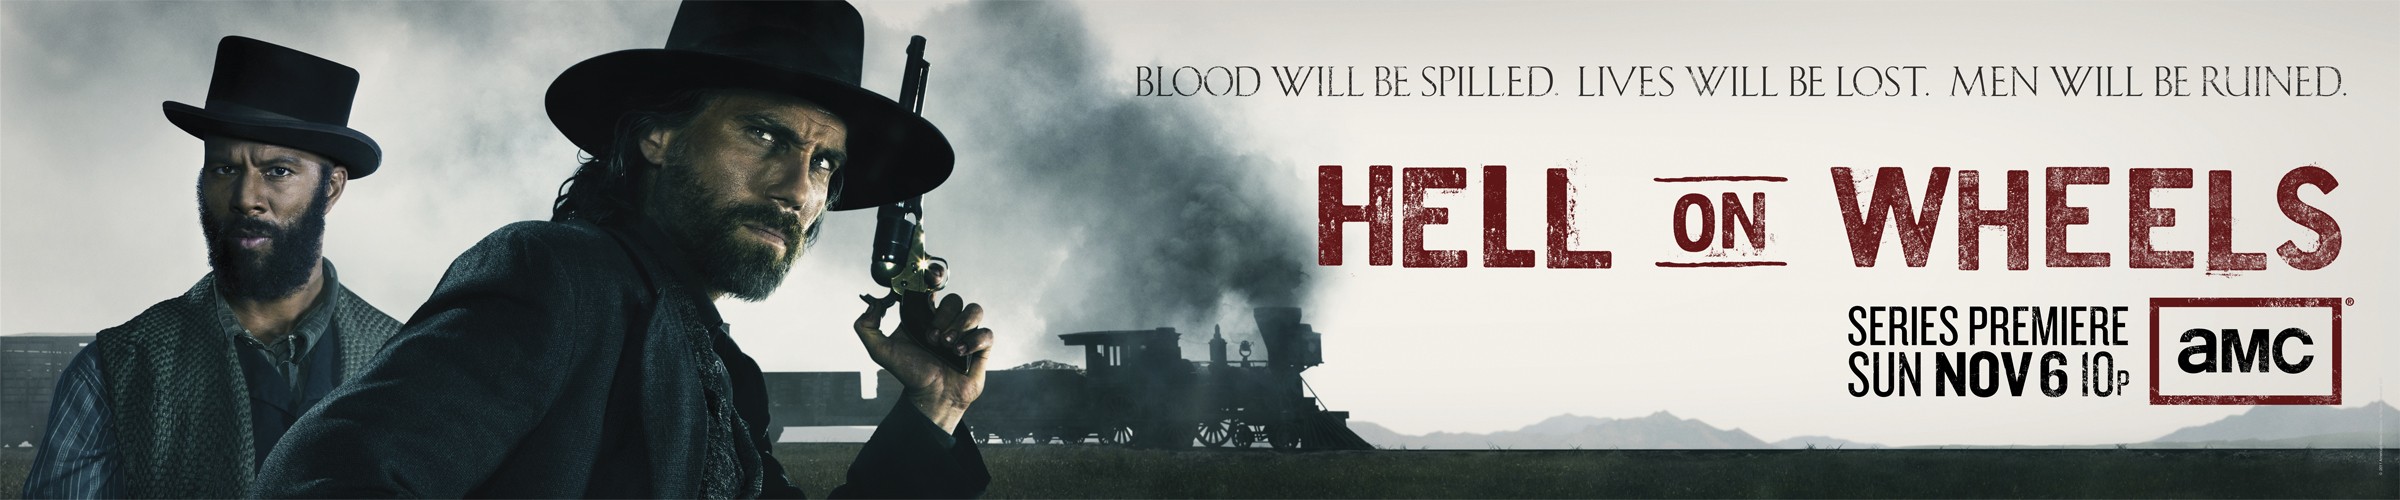 Mega Sized TV Poster Image for Hell on Wheels (#2 of 18)